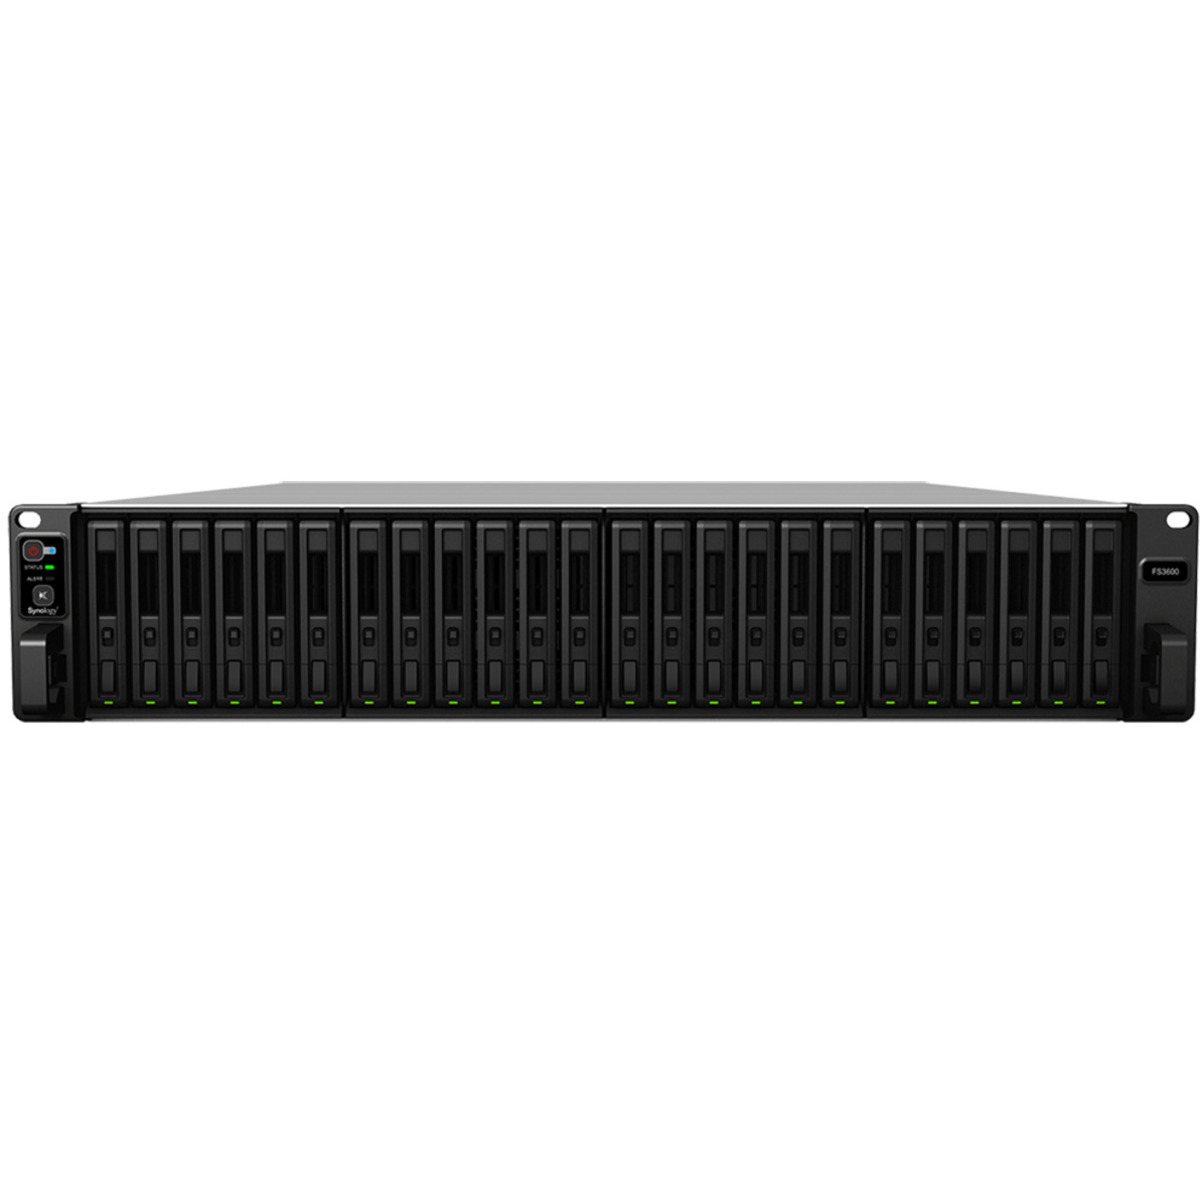 Synology FlashStation FS3600 96tb 24-Bay RackMount Large Business / Enterprise NAS - Network Attached Storage Device 24x4tb Crucial MX500 CT4000MX500SSD1 2.5 560/510MB/s SATA 6Gb/s SSD CONSUMER Class Drives Installed - Burn-In Tested - FREE RAM UPGRADE FlashStation FS3600